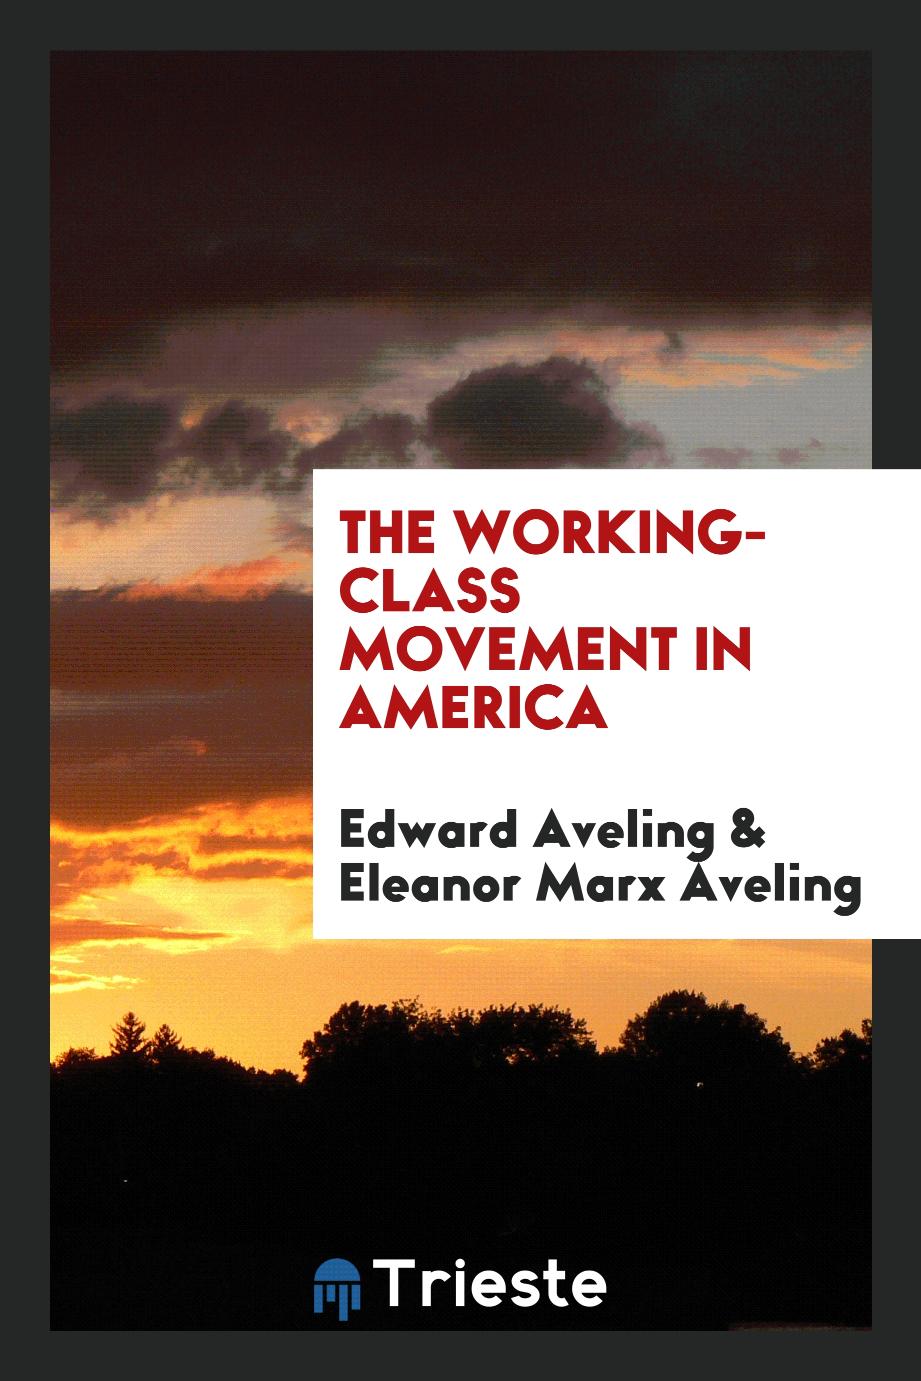 The working-class movement in America